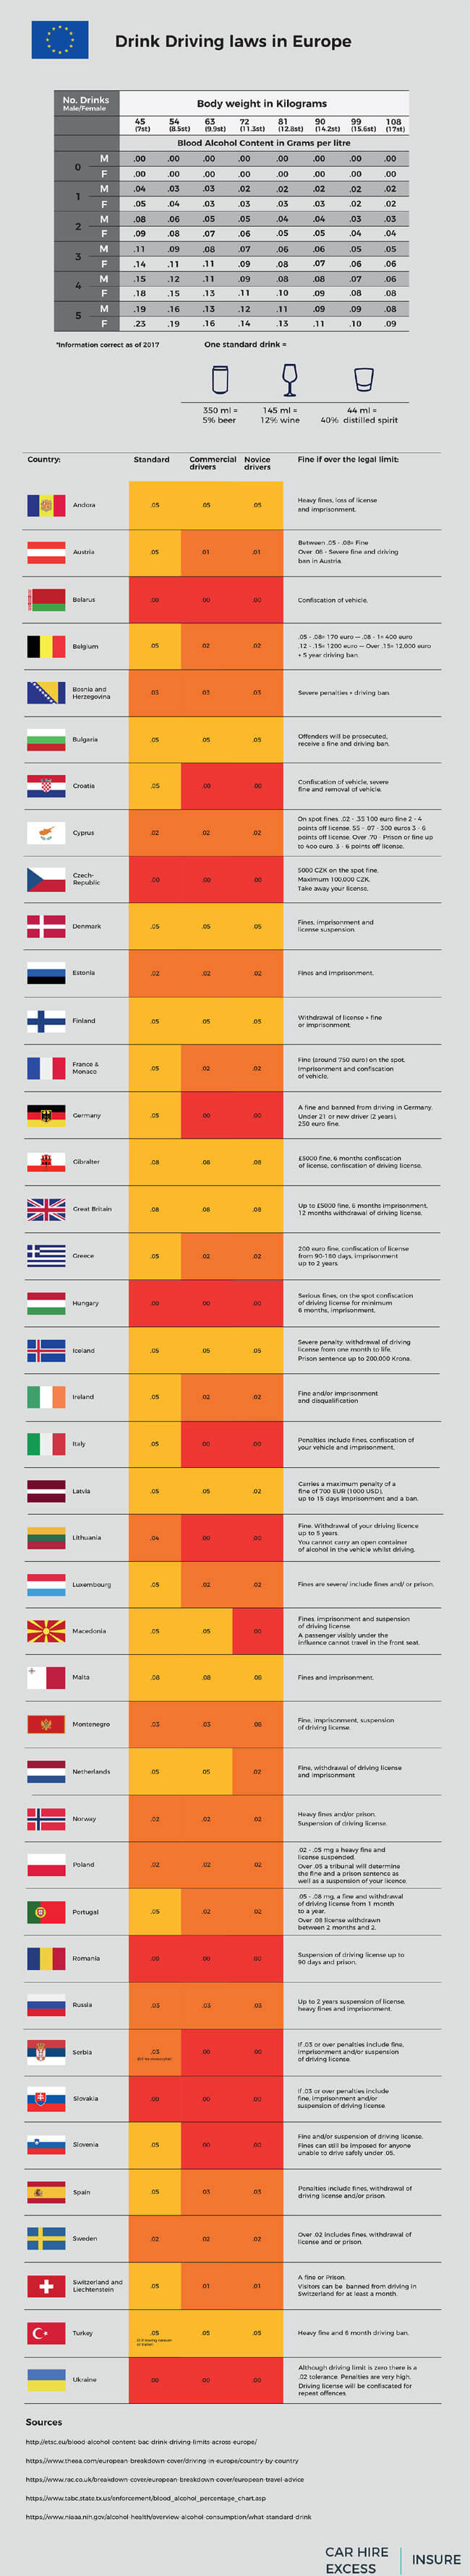 Drink Driving Laws in Europe